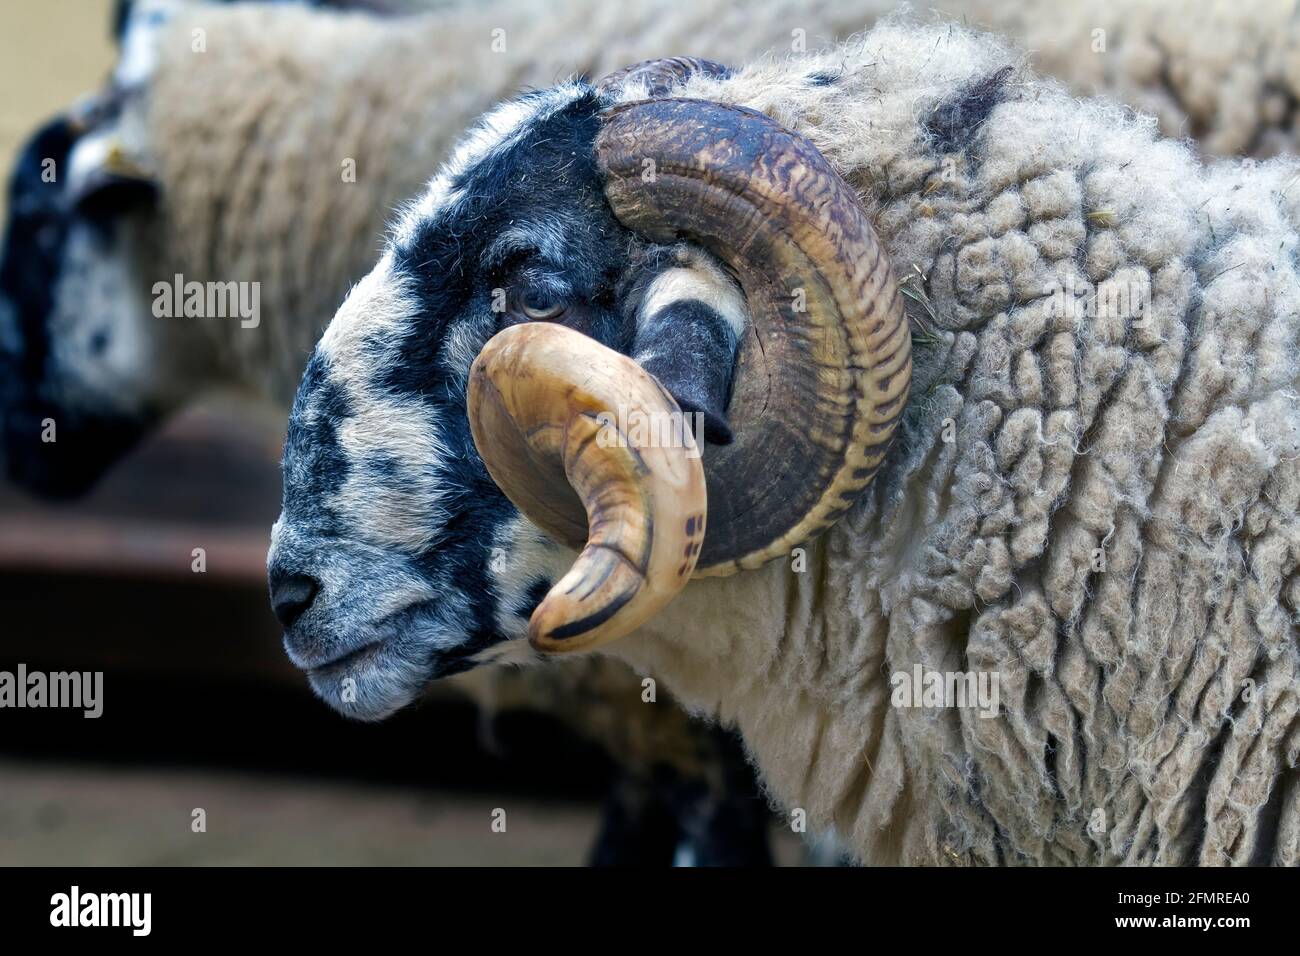 Black-faced sheep Latxa, detail of head and antlers Stock Photo